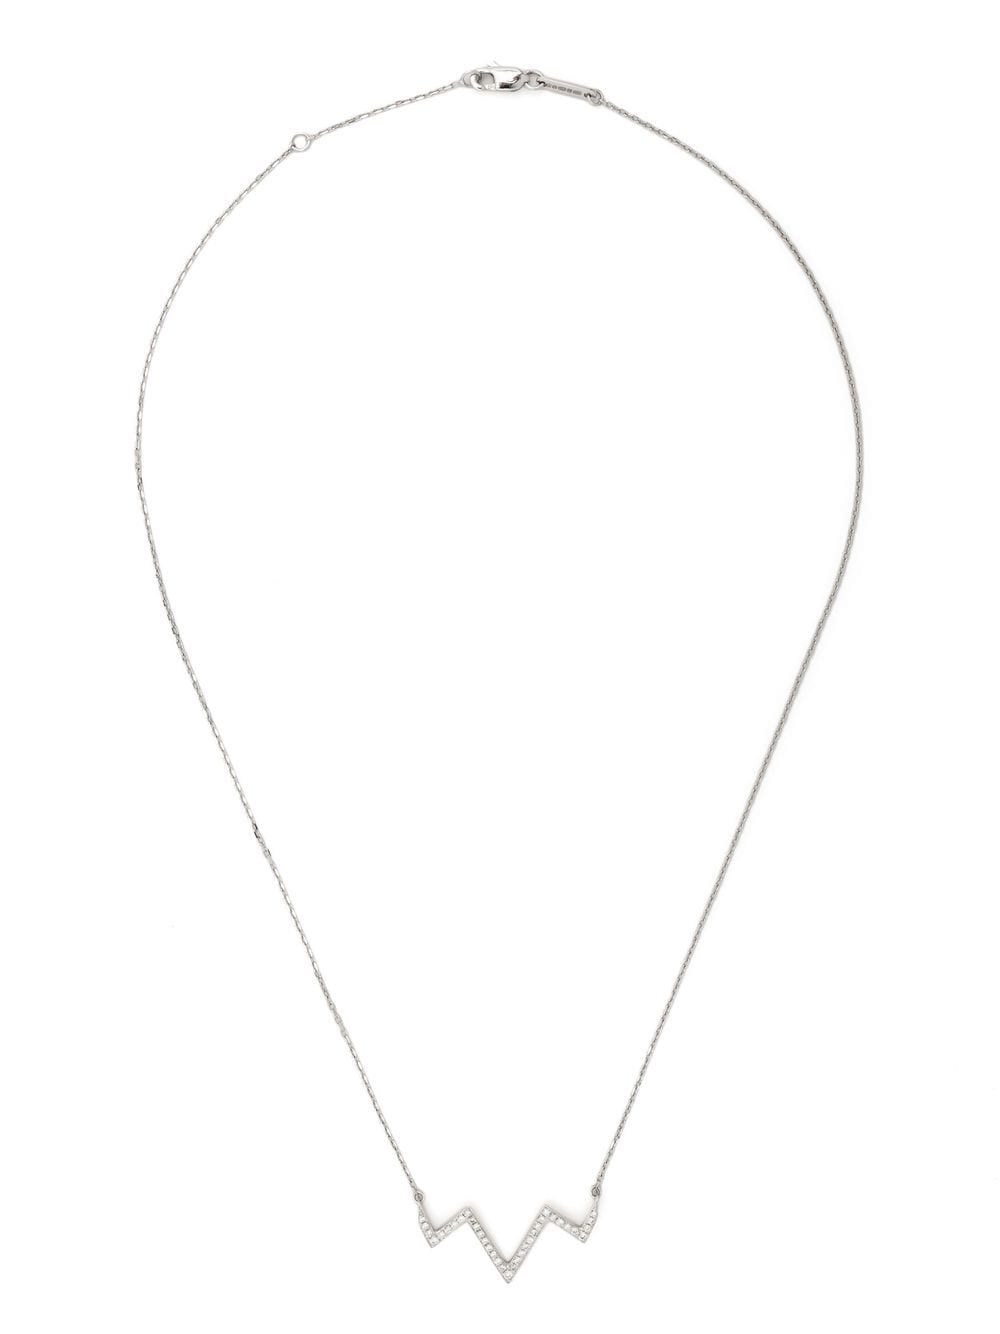 Stephen Webster 18kt White Gold Lady Stardust Diamond Necklace In Silver